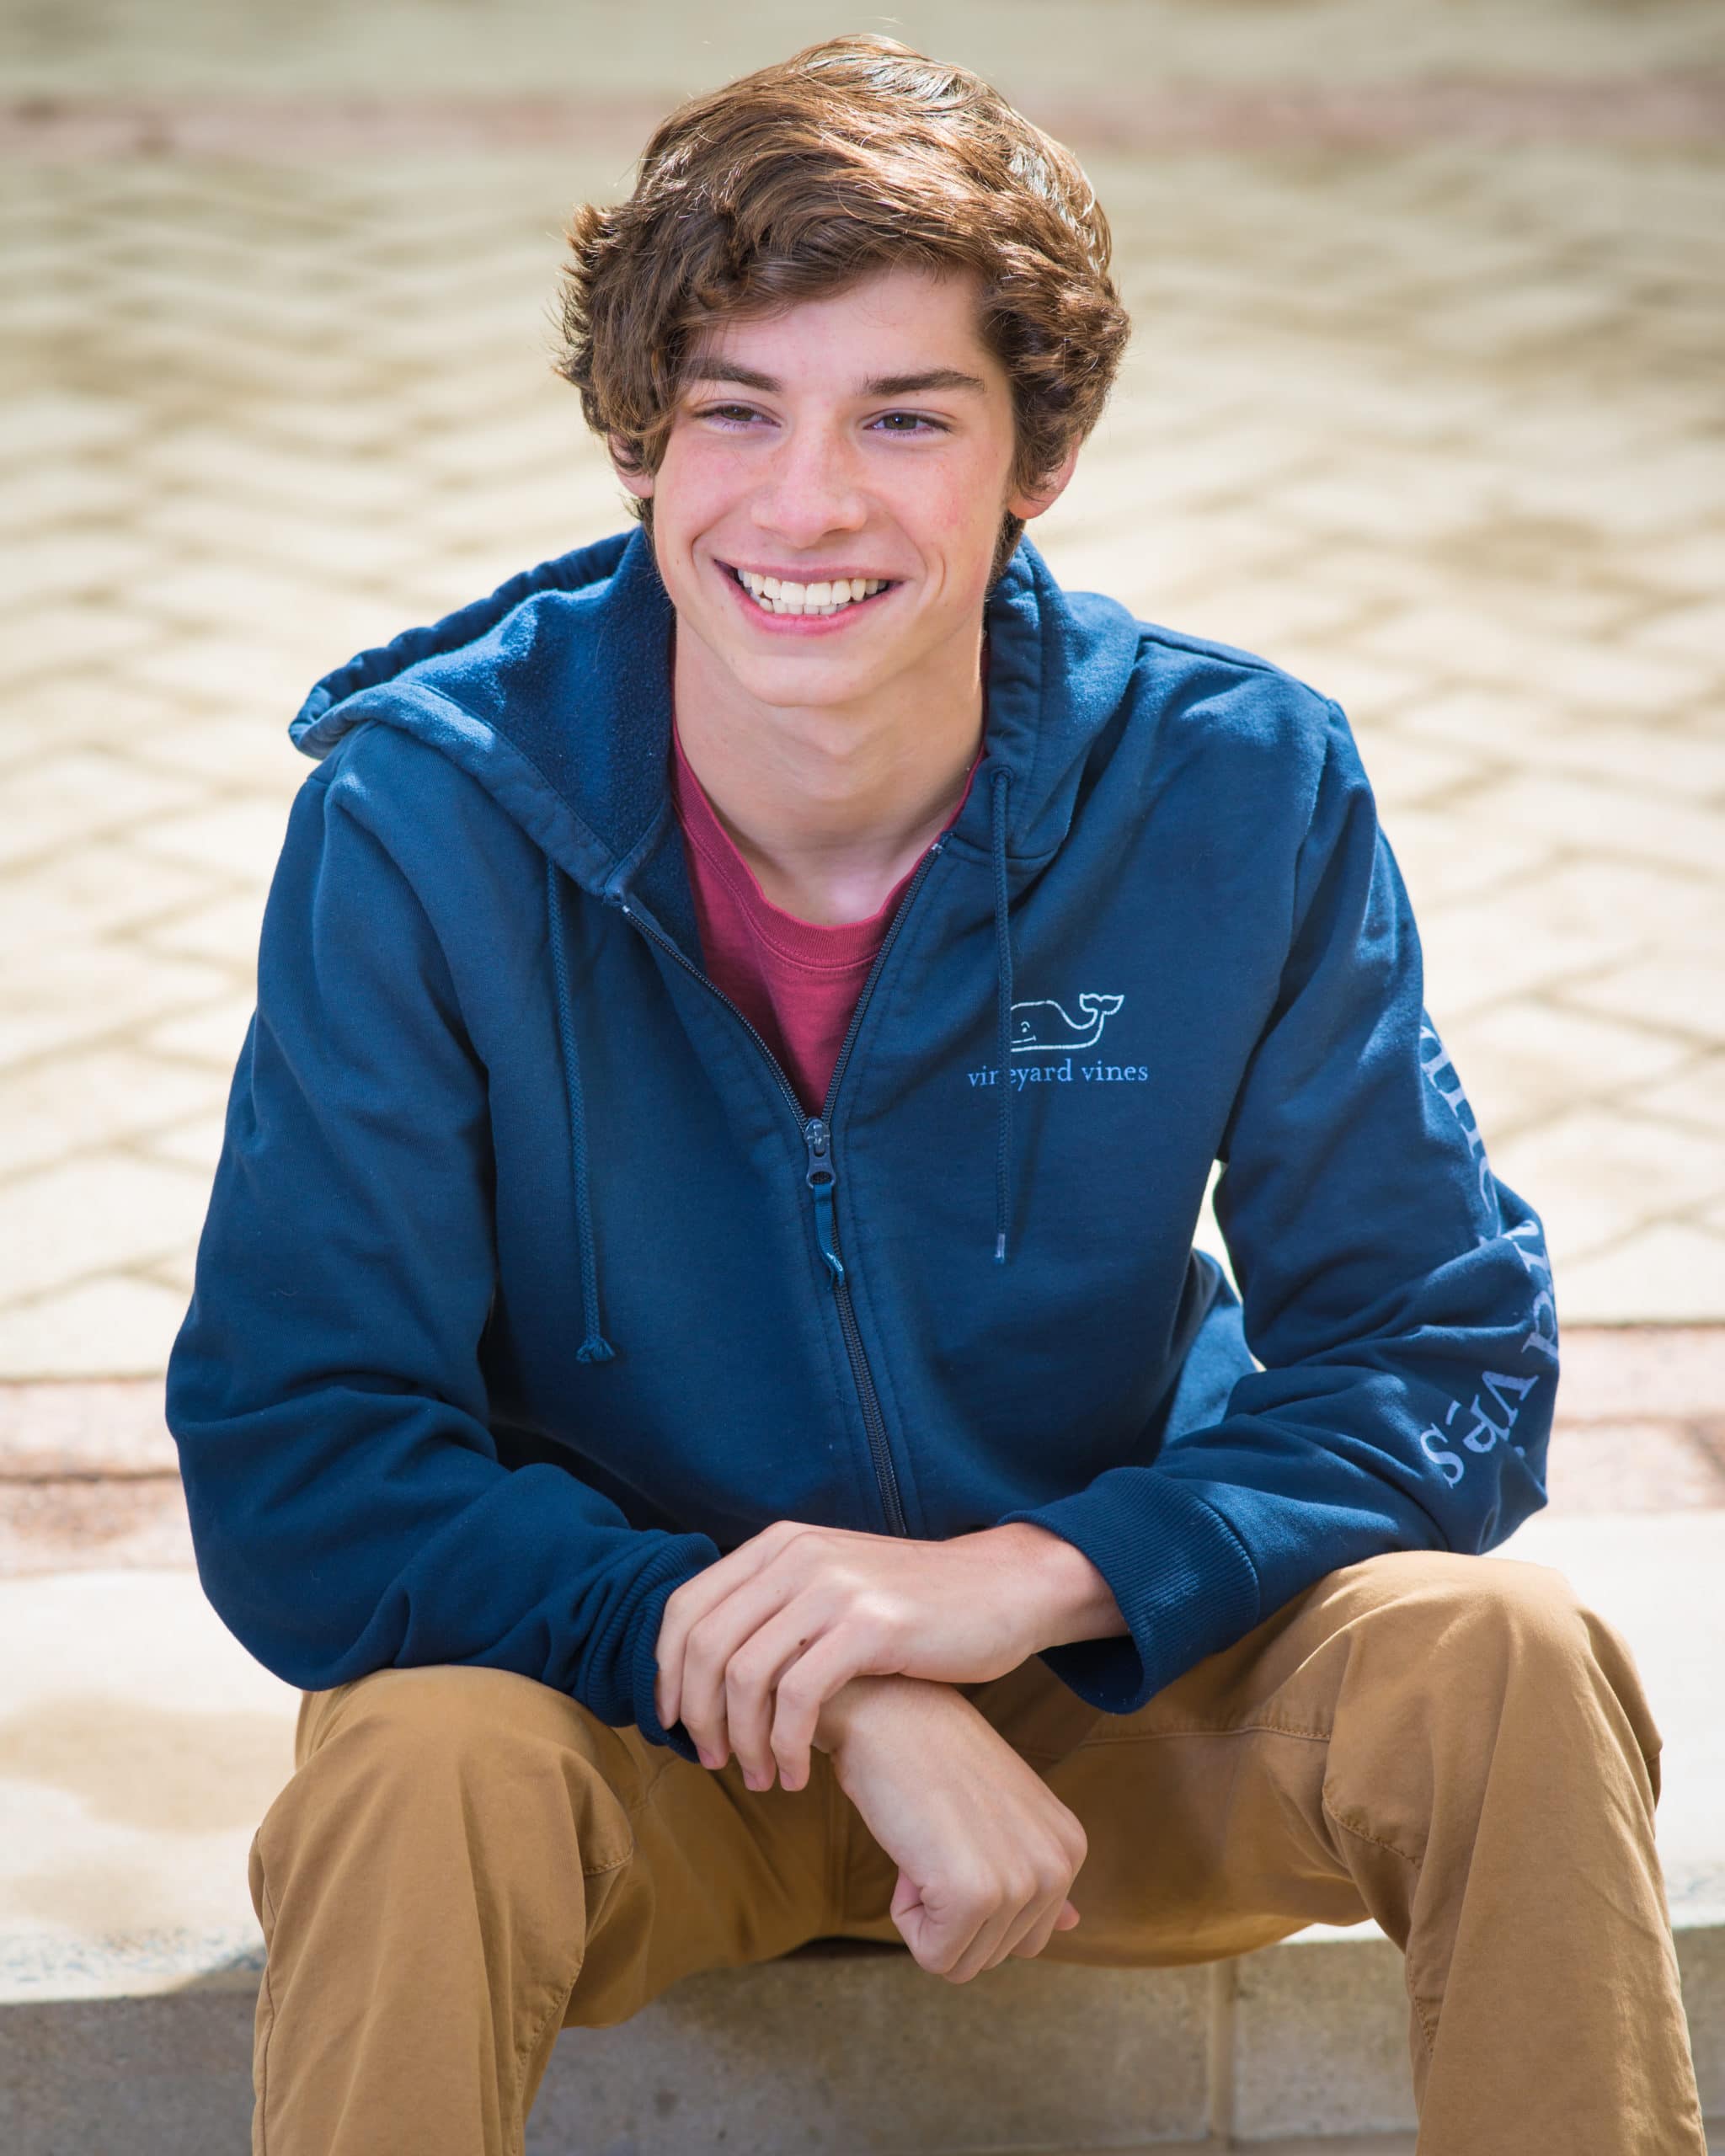 A teen boy with brown hair smiling and sitting on stairs. He wears a blue Vineyard Vines sweatshirt.